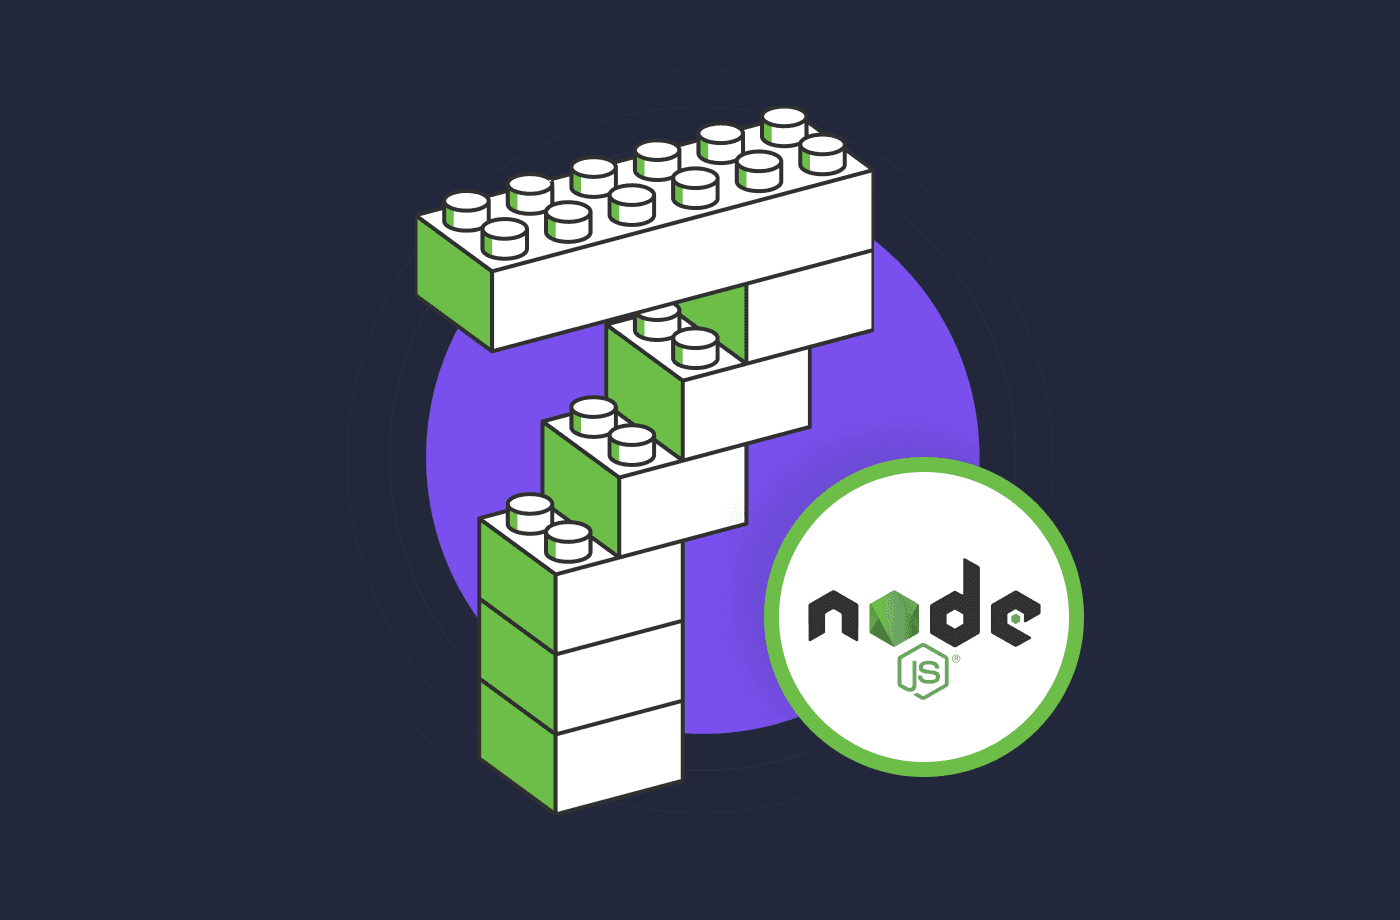 7 Tips to Build Scalable Node.js Applications